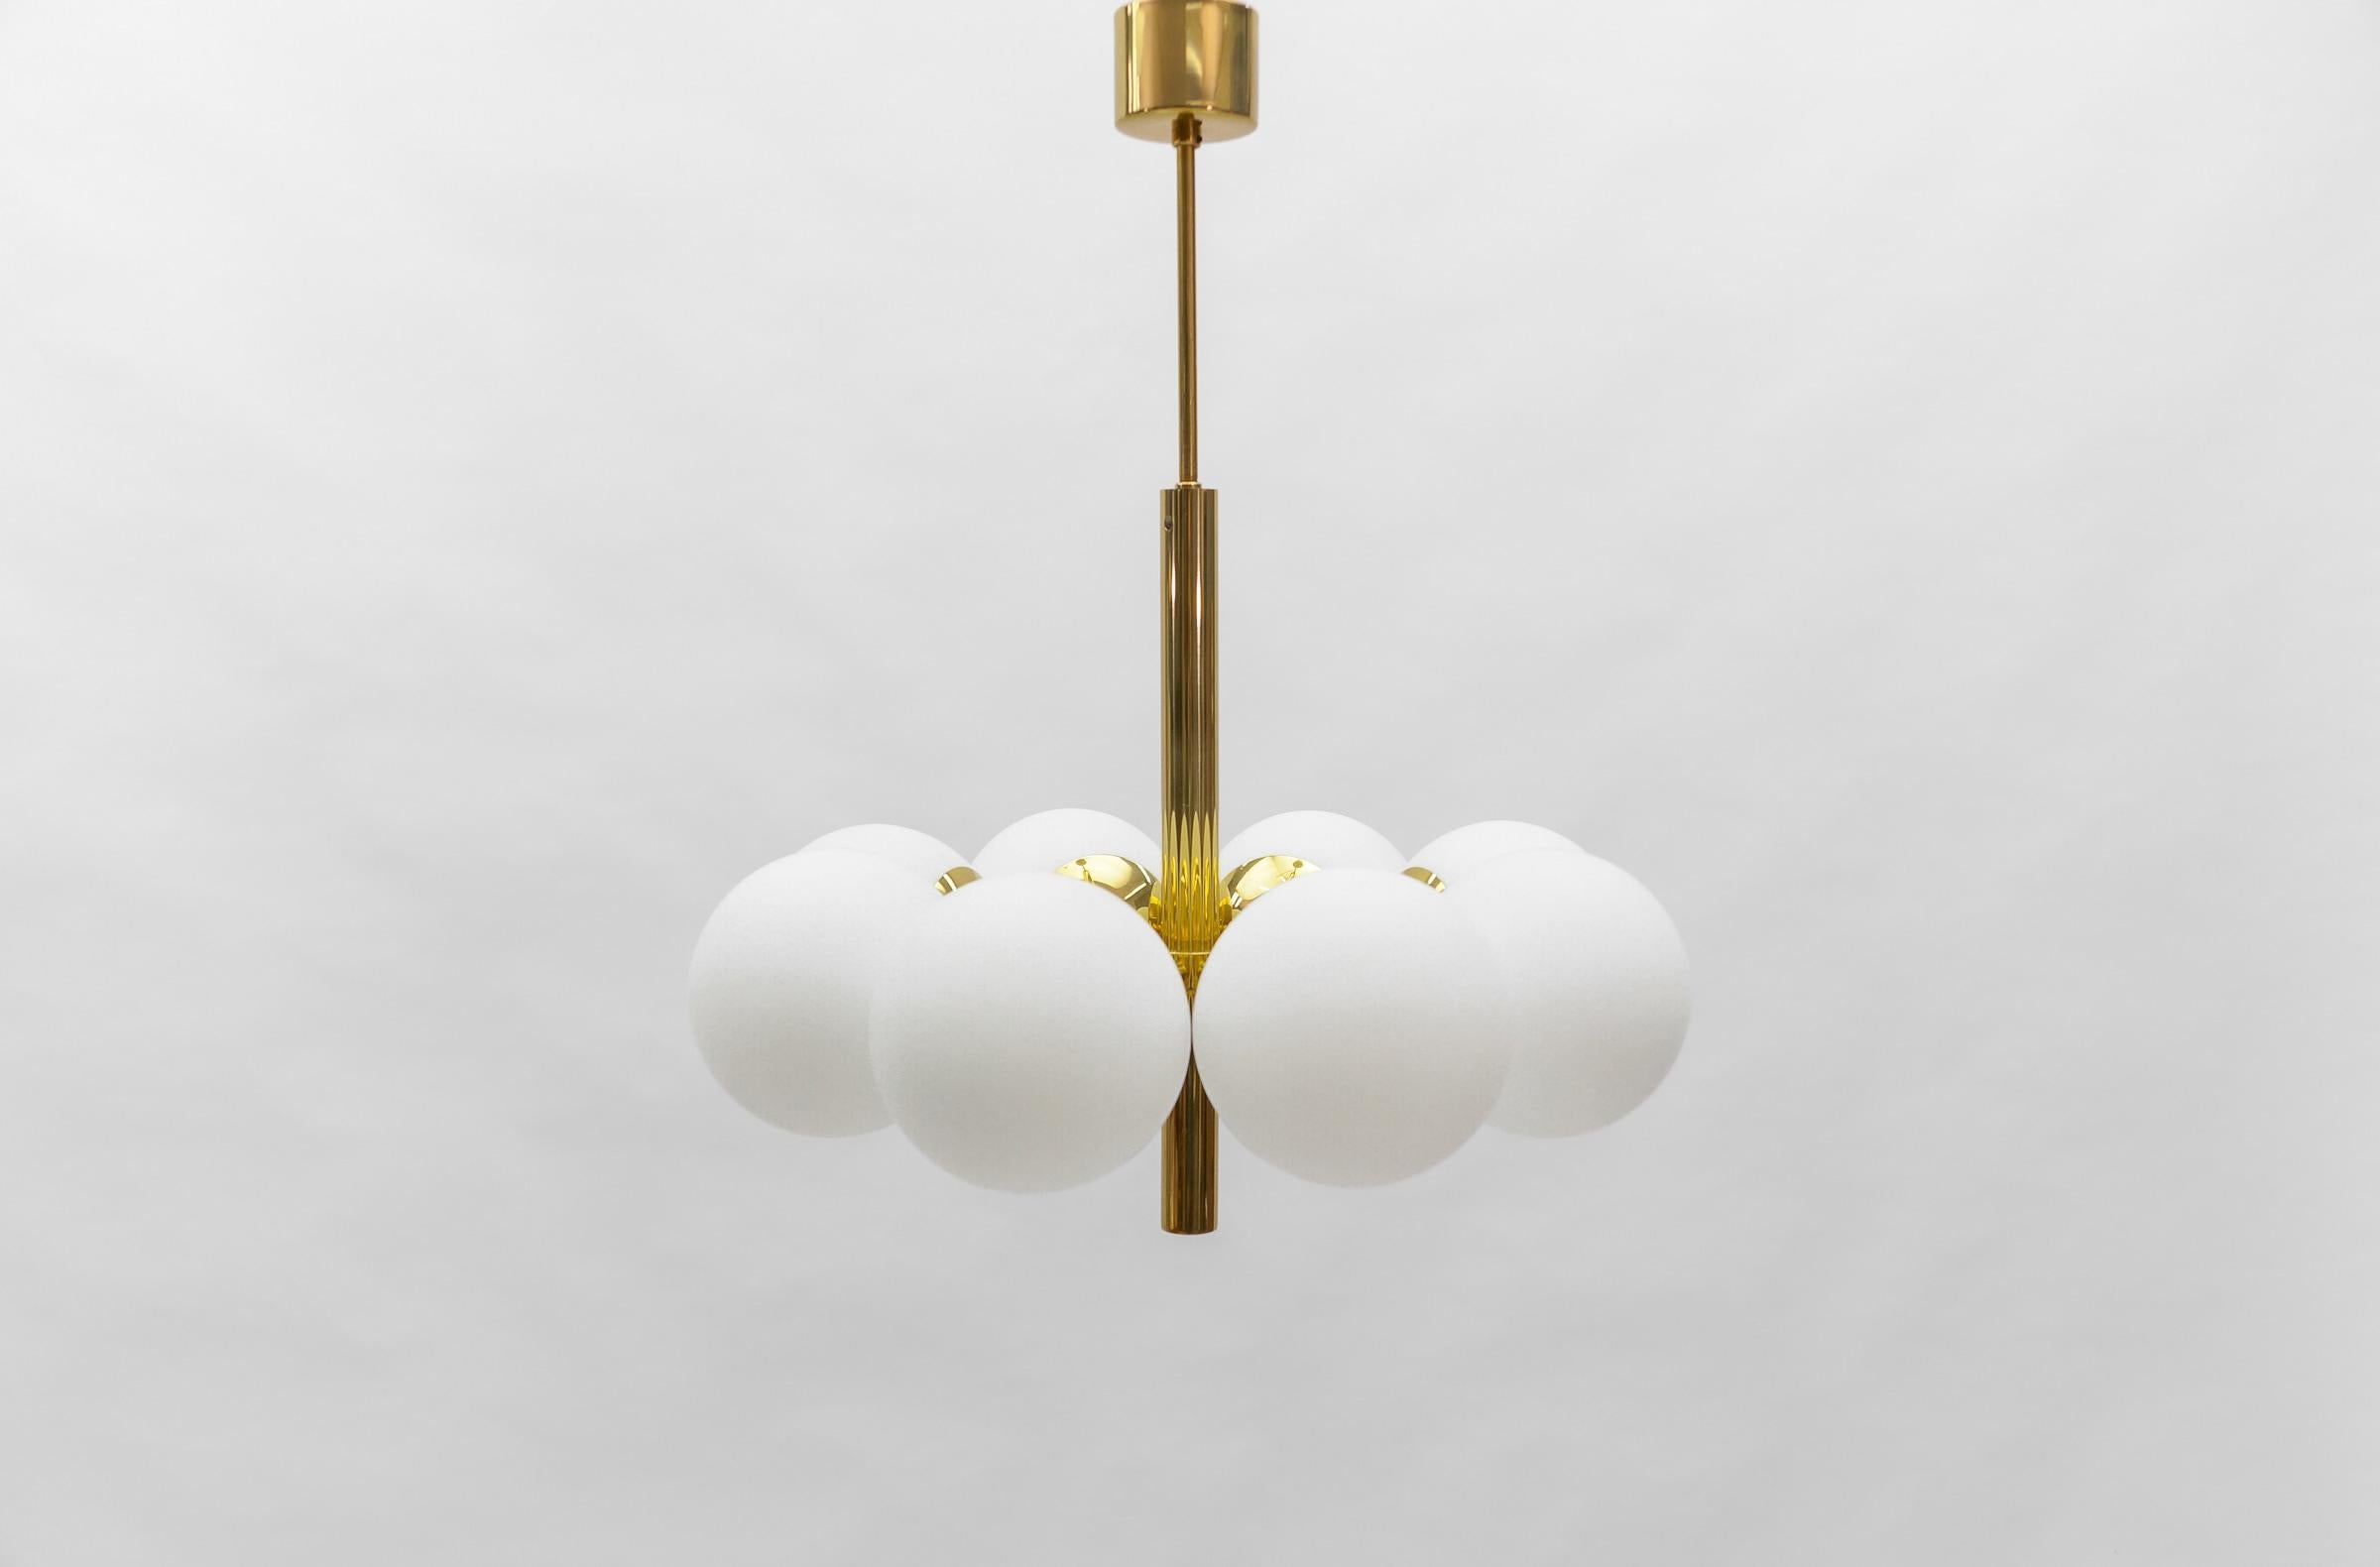 Beautiful golden Sputnik chandelier from the 1960s.
The opal glass lampshades spread a cozy light.
The lamp has a very high-quality finish.
Very modern design with a fantastic look.

Manufacturer: Kaiser Leuchten

The height can be increased from